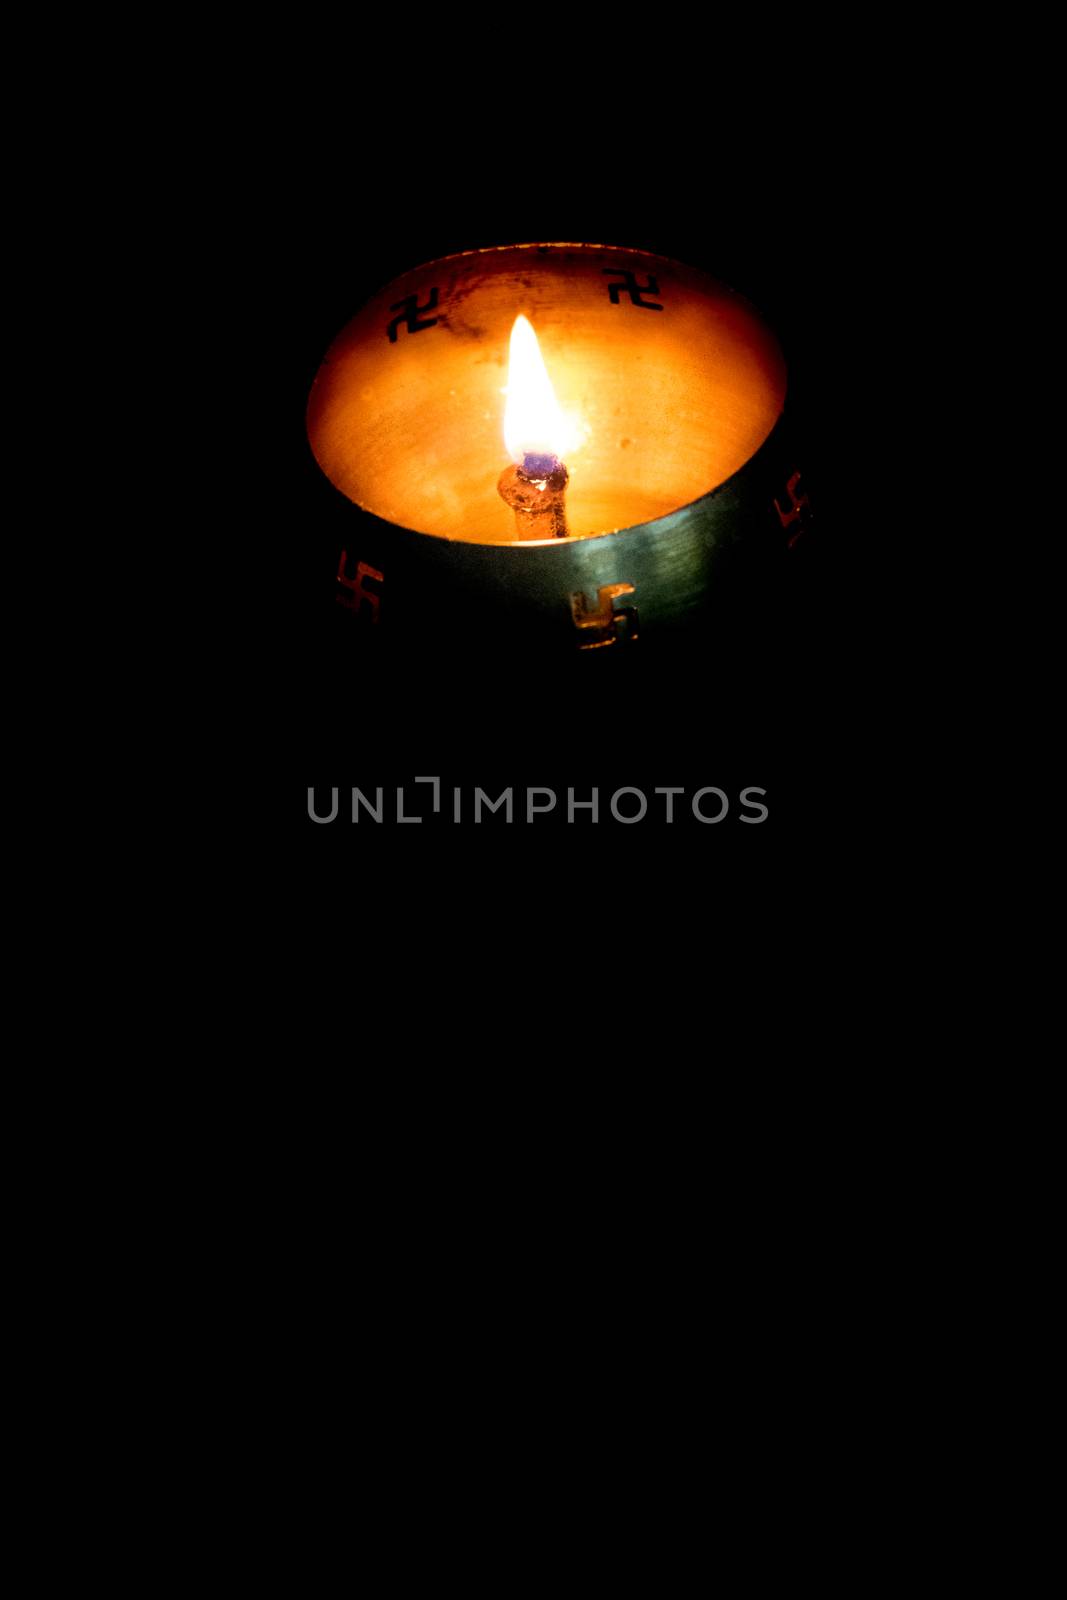 Flame of oil lamp on dark background by sudiptabhowmick